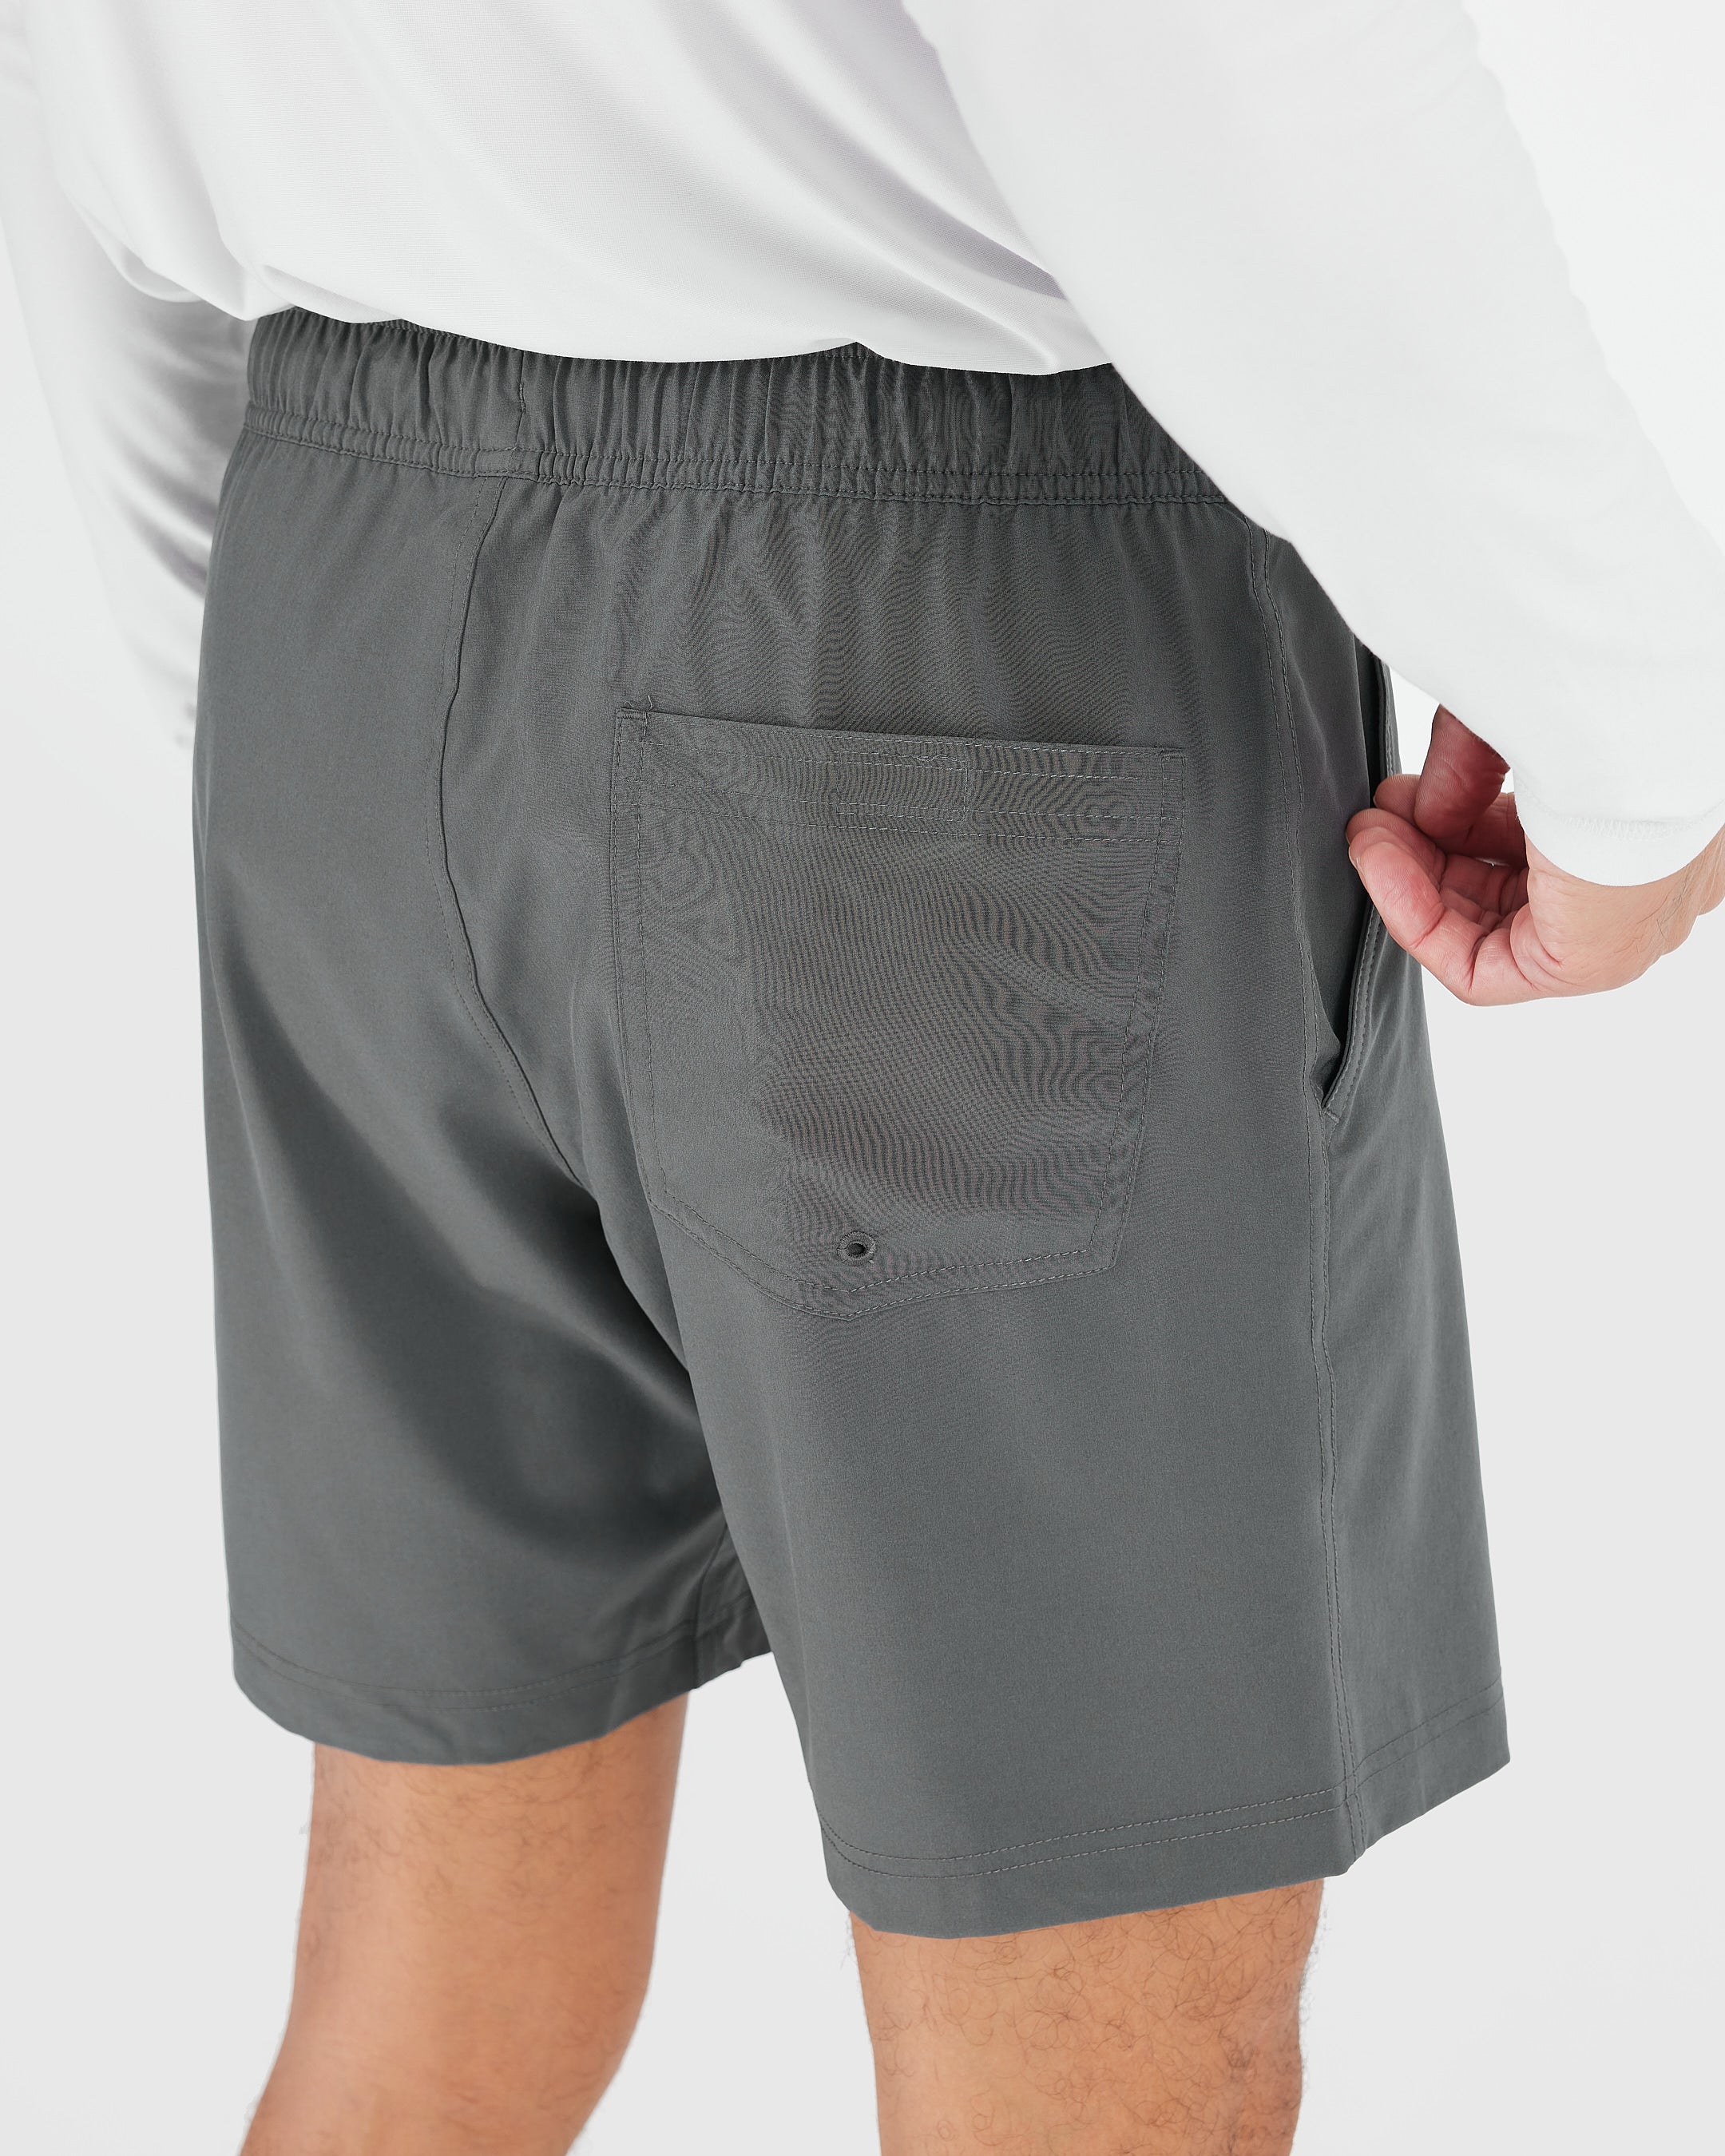 Carbon Active Quick Dry Short with Liner – True Classic